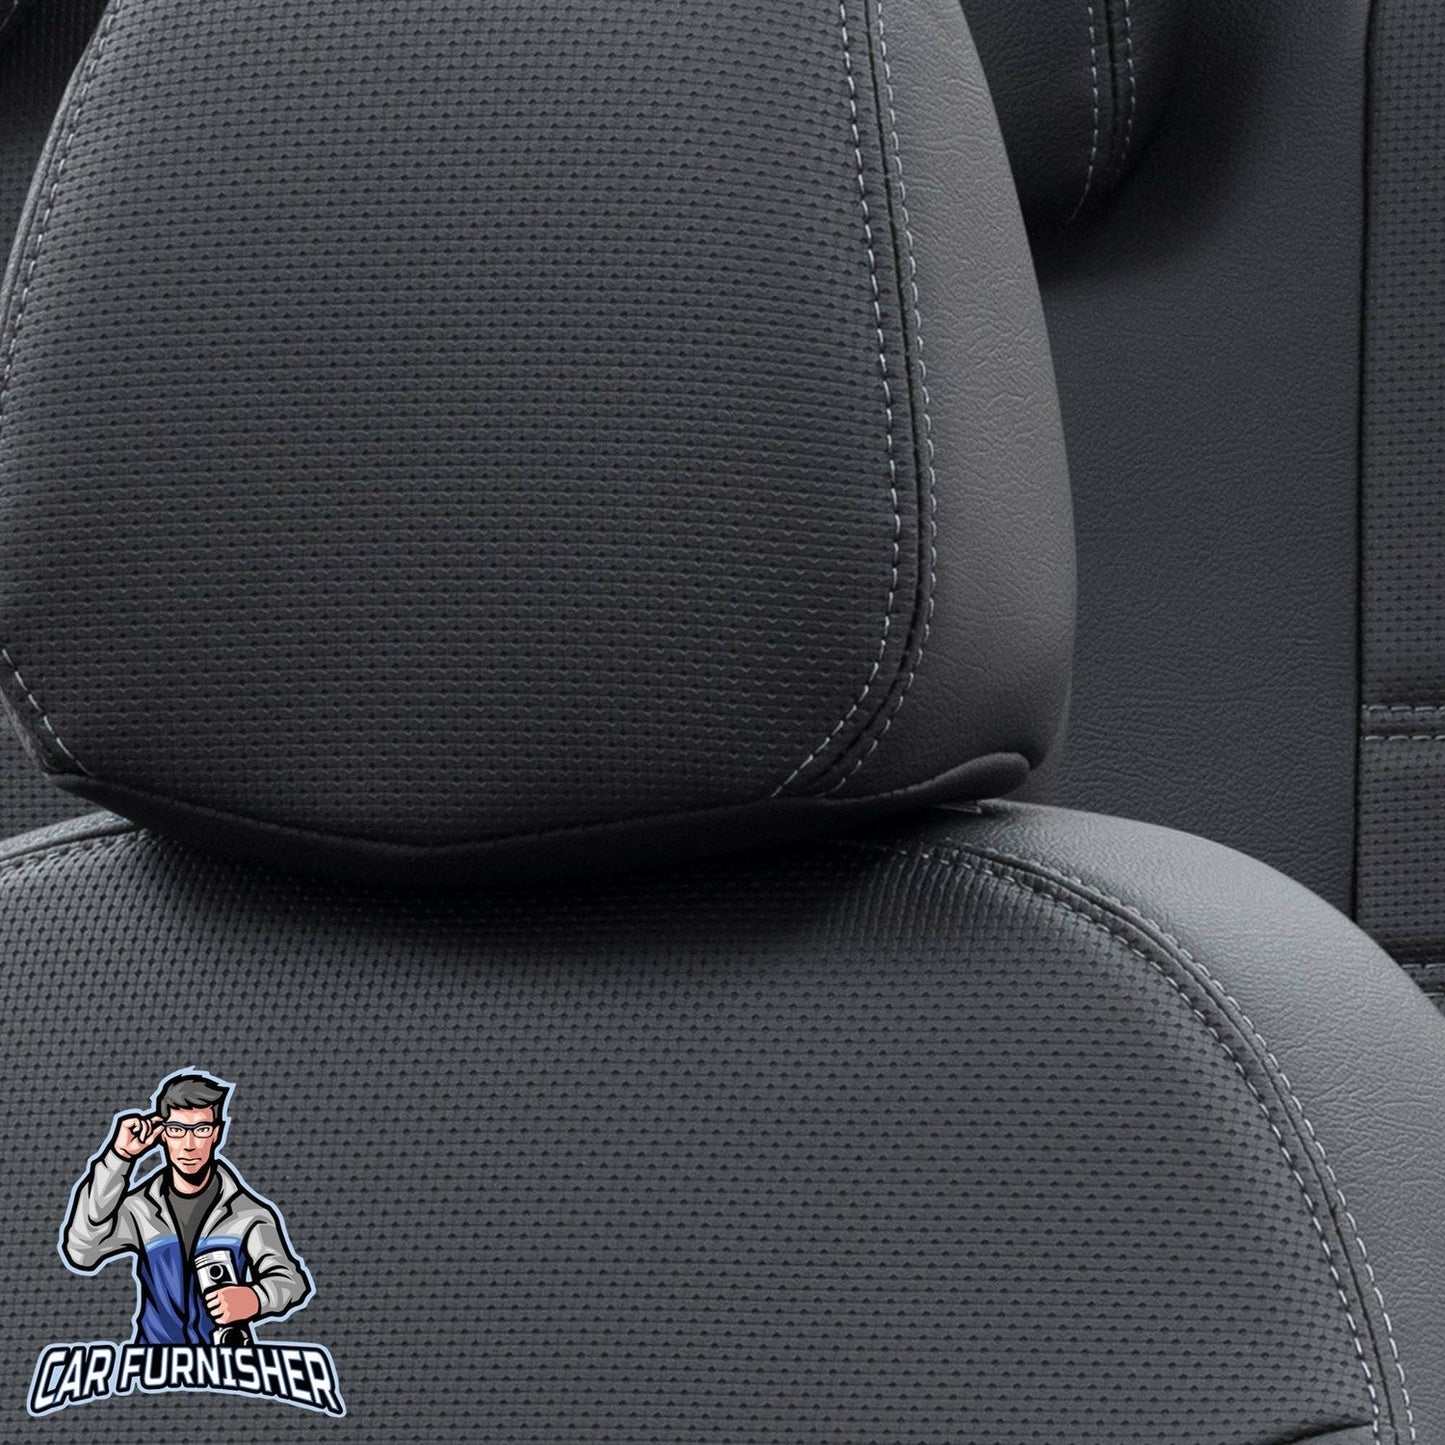 Peugeot 106 Seat Covers New York Leather Design Black Leather